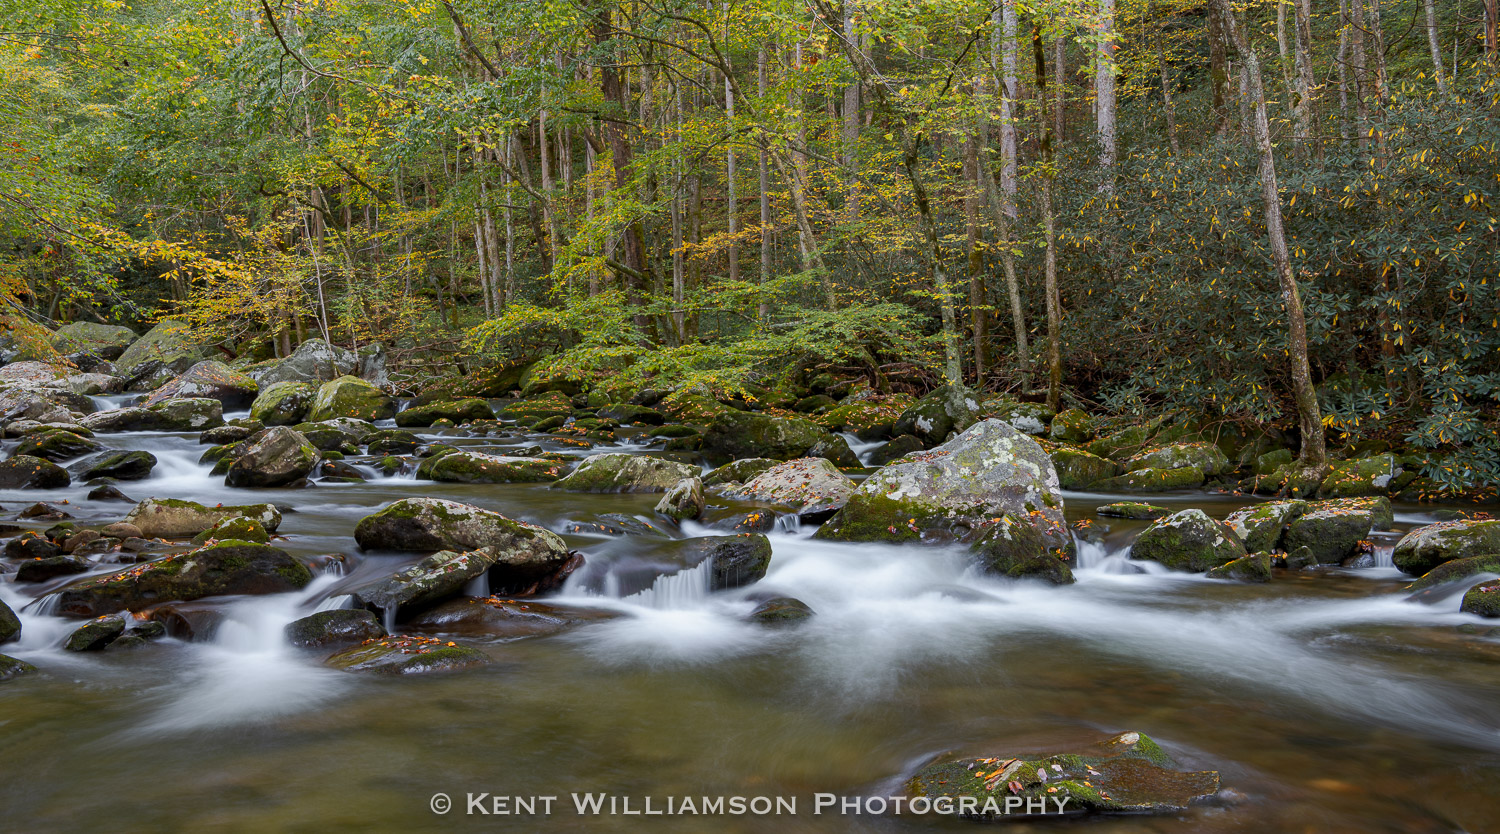 Early spring color along the Little River near Cades Cove, 2020